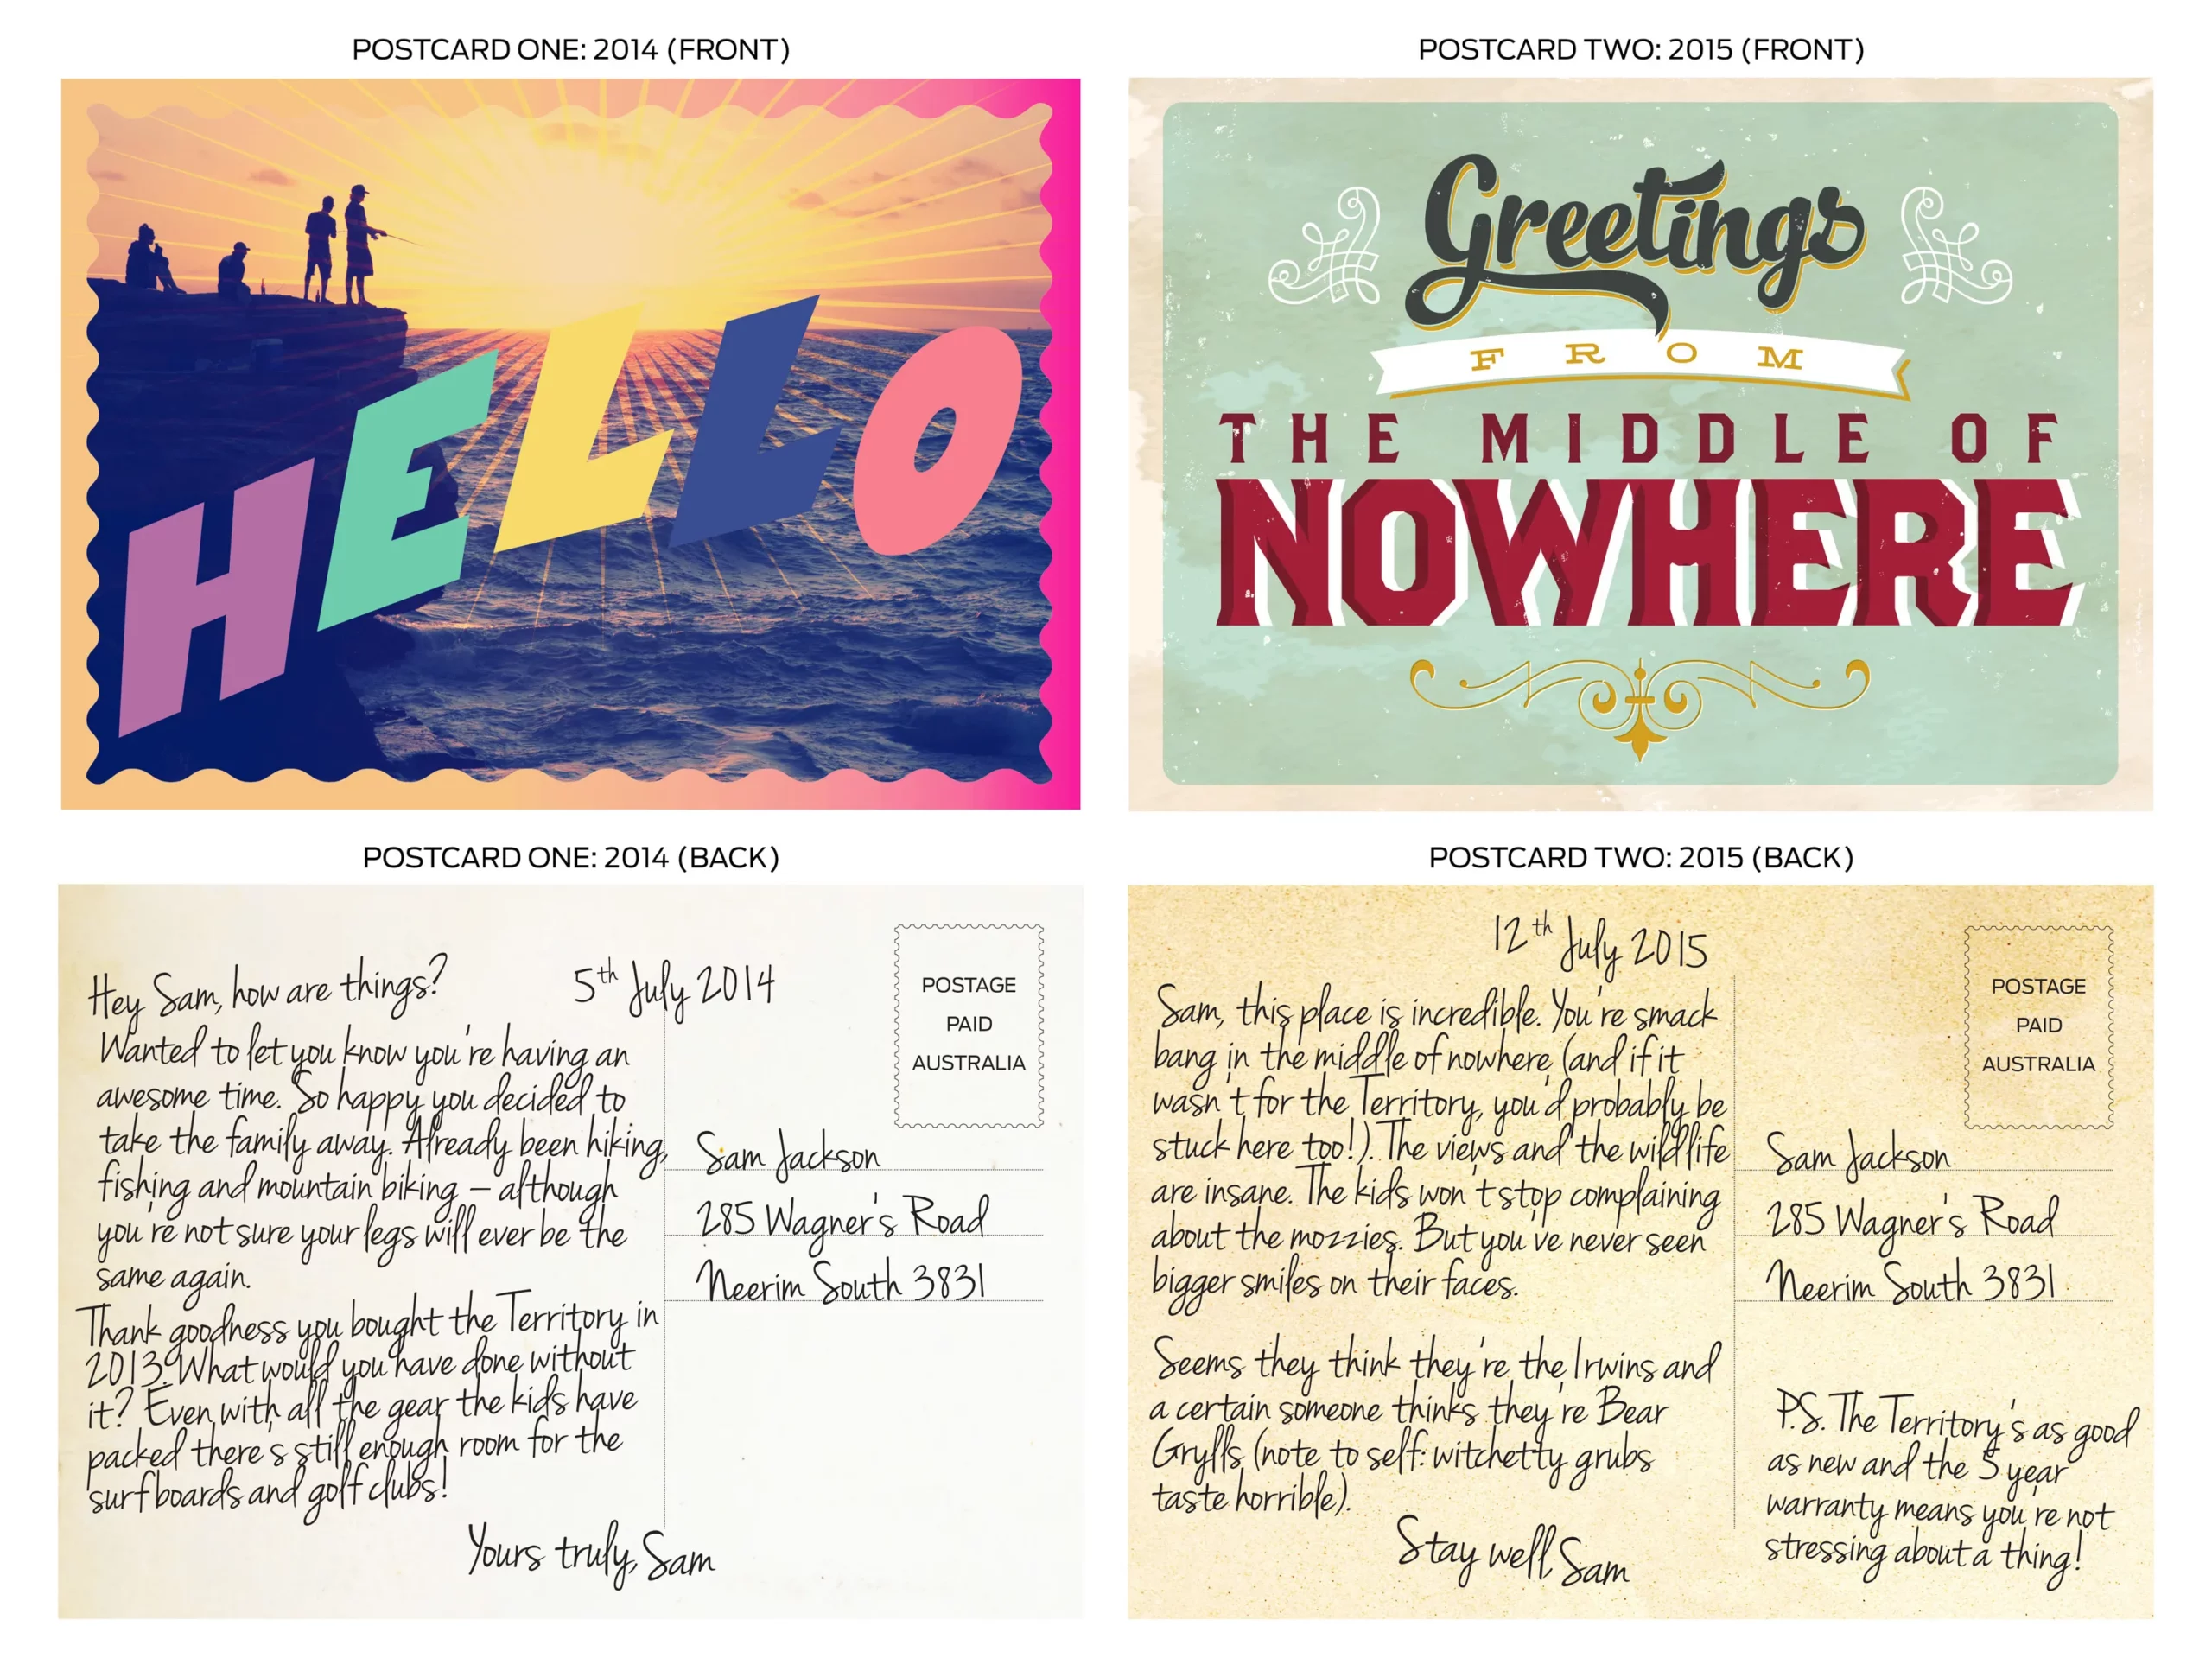 Creative CRM postcards send to Ford customers about the adventures they are missing out of